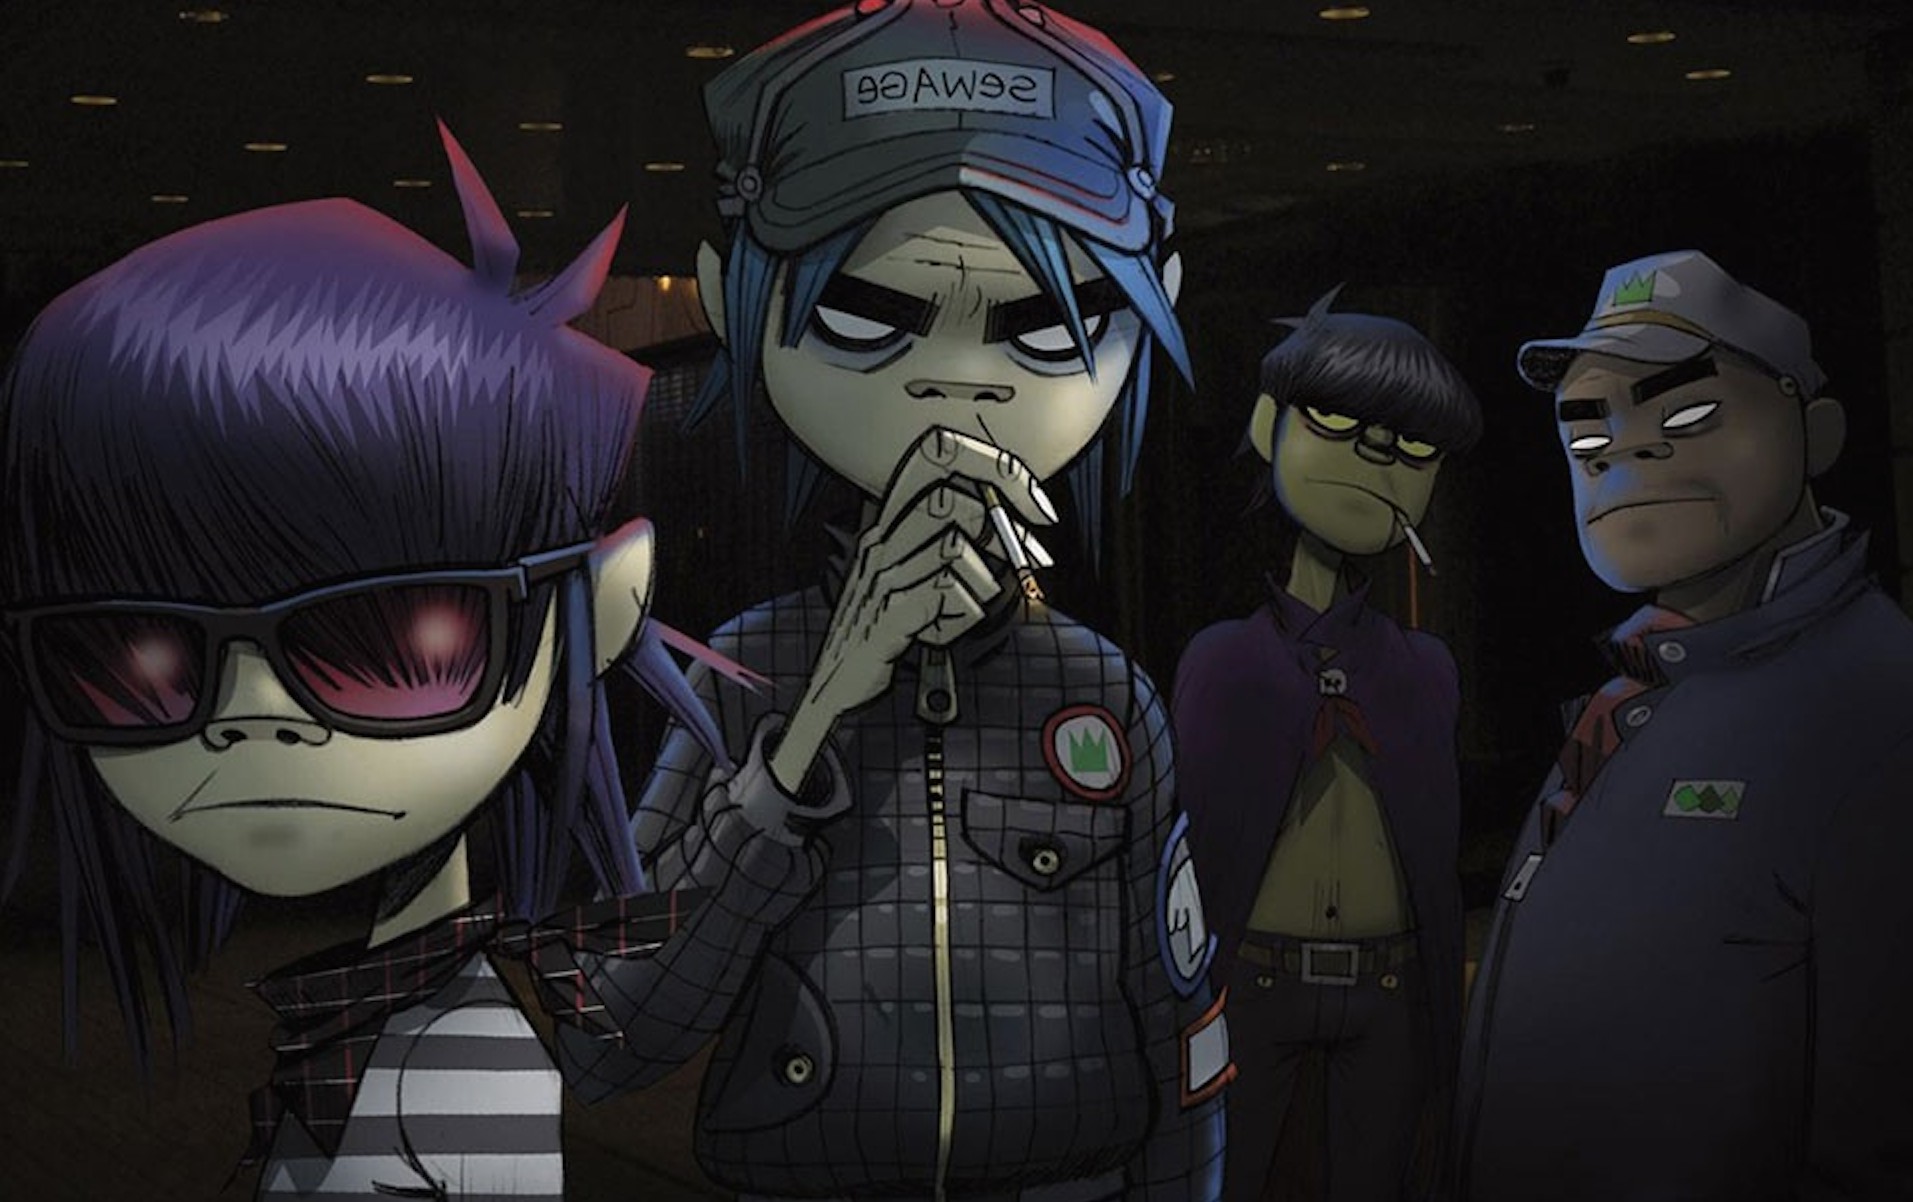 Let's Get Animated Gorillaz announce North American 'Humanz' tour